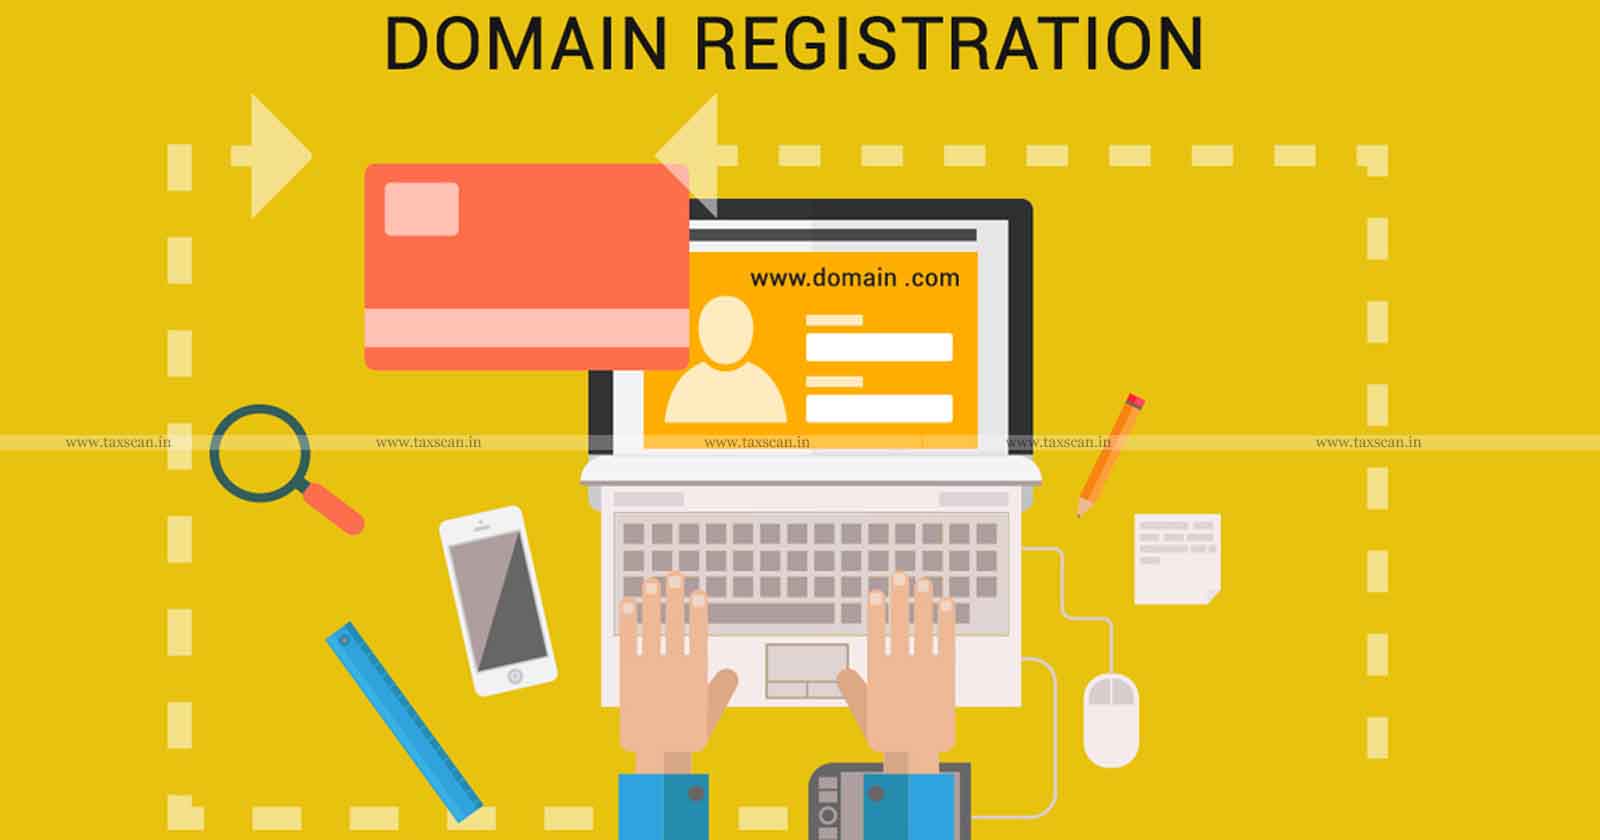 Sale of Domain Name - Resellers - Royalty - ITAT - ITAT deletes Addition - Income Tax - Tax - Taxscan